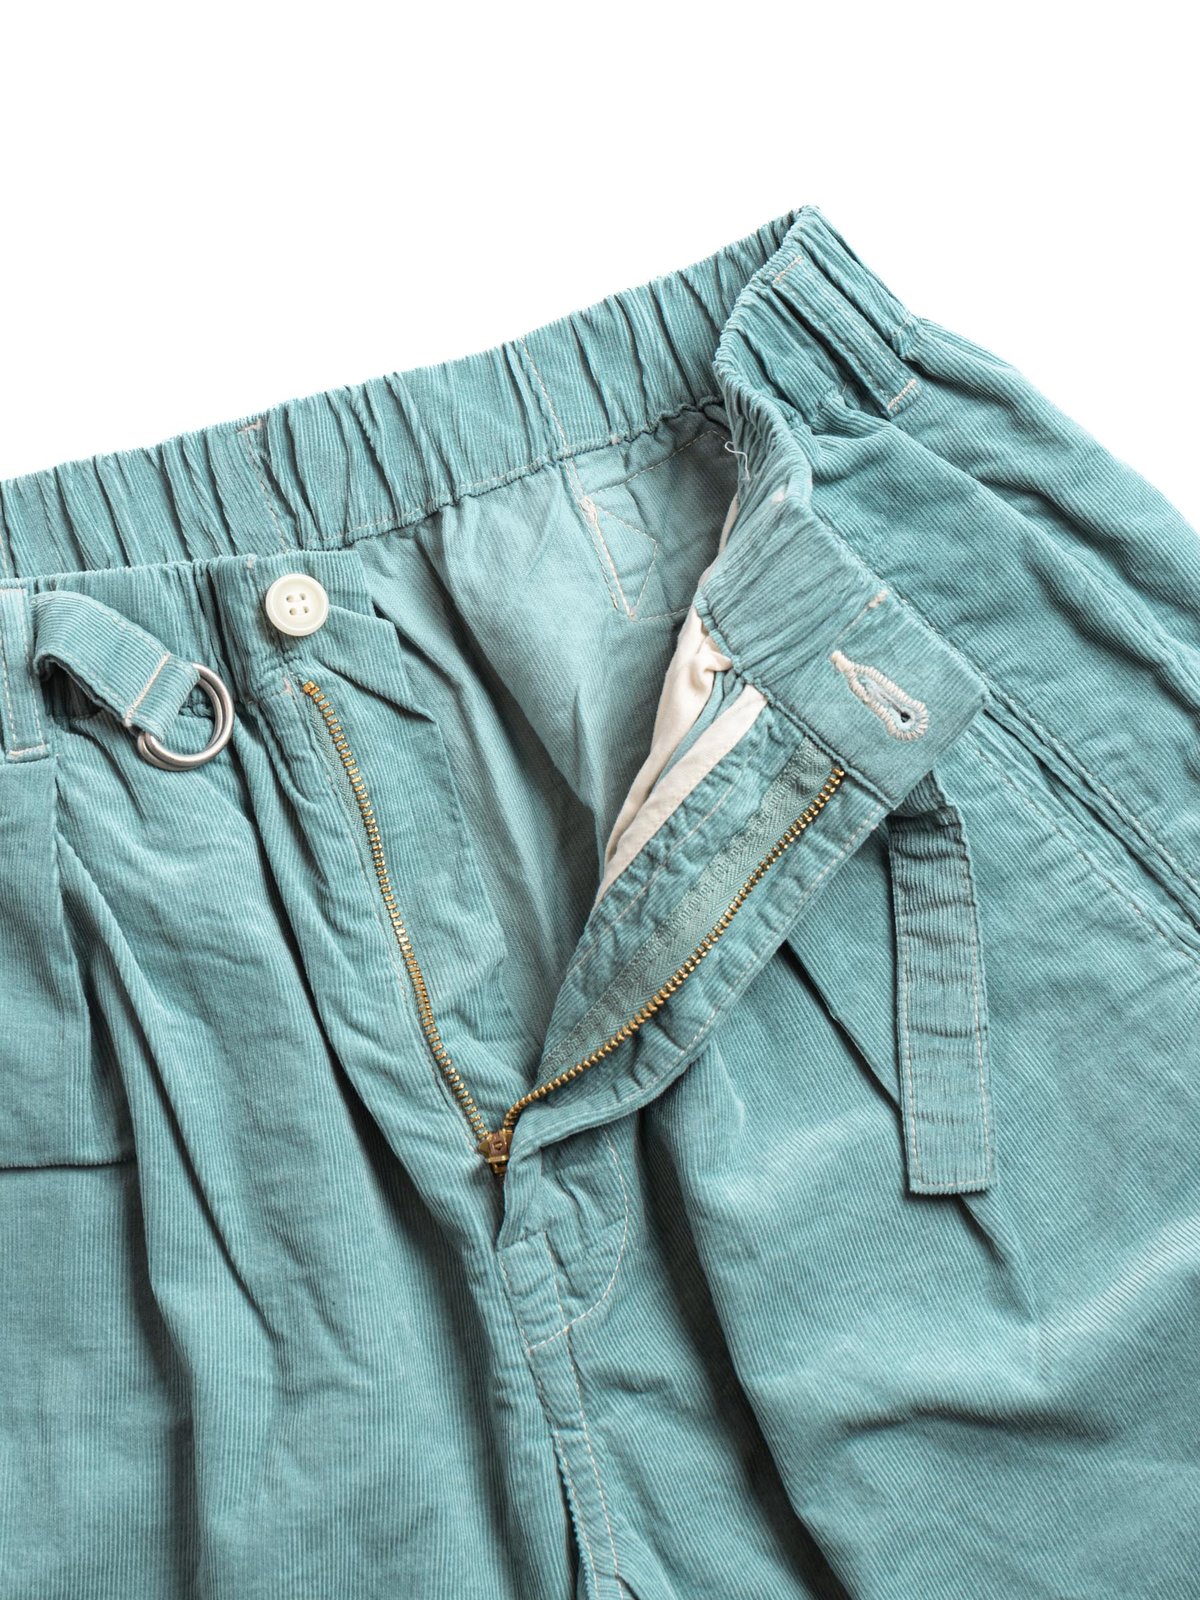 E–Z LAX 4 SHORTS SUMMER CORDS MUSCAT GREEN - Image 3